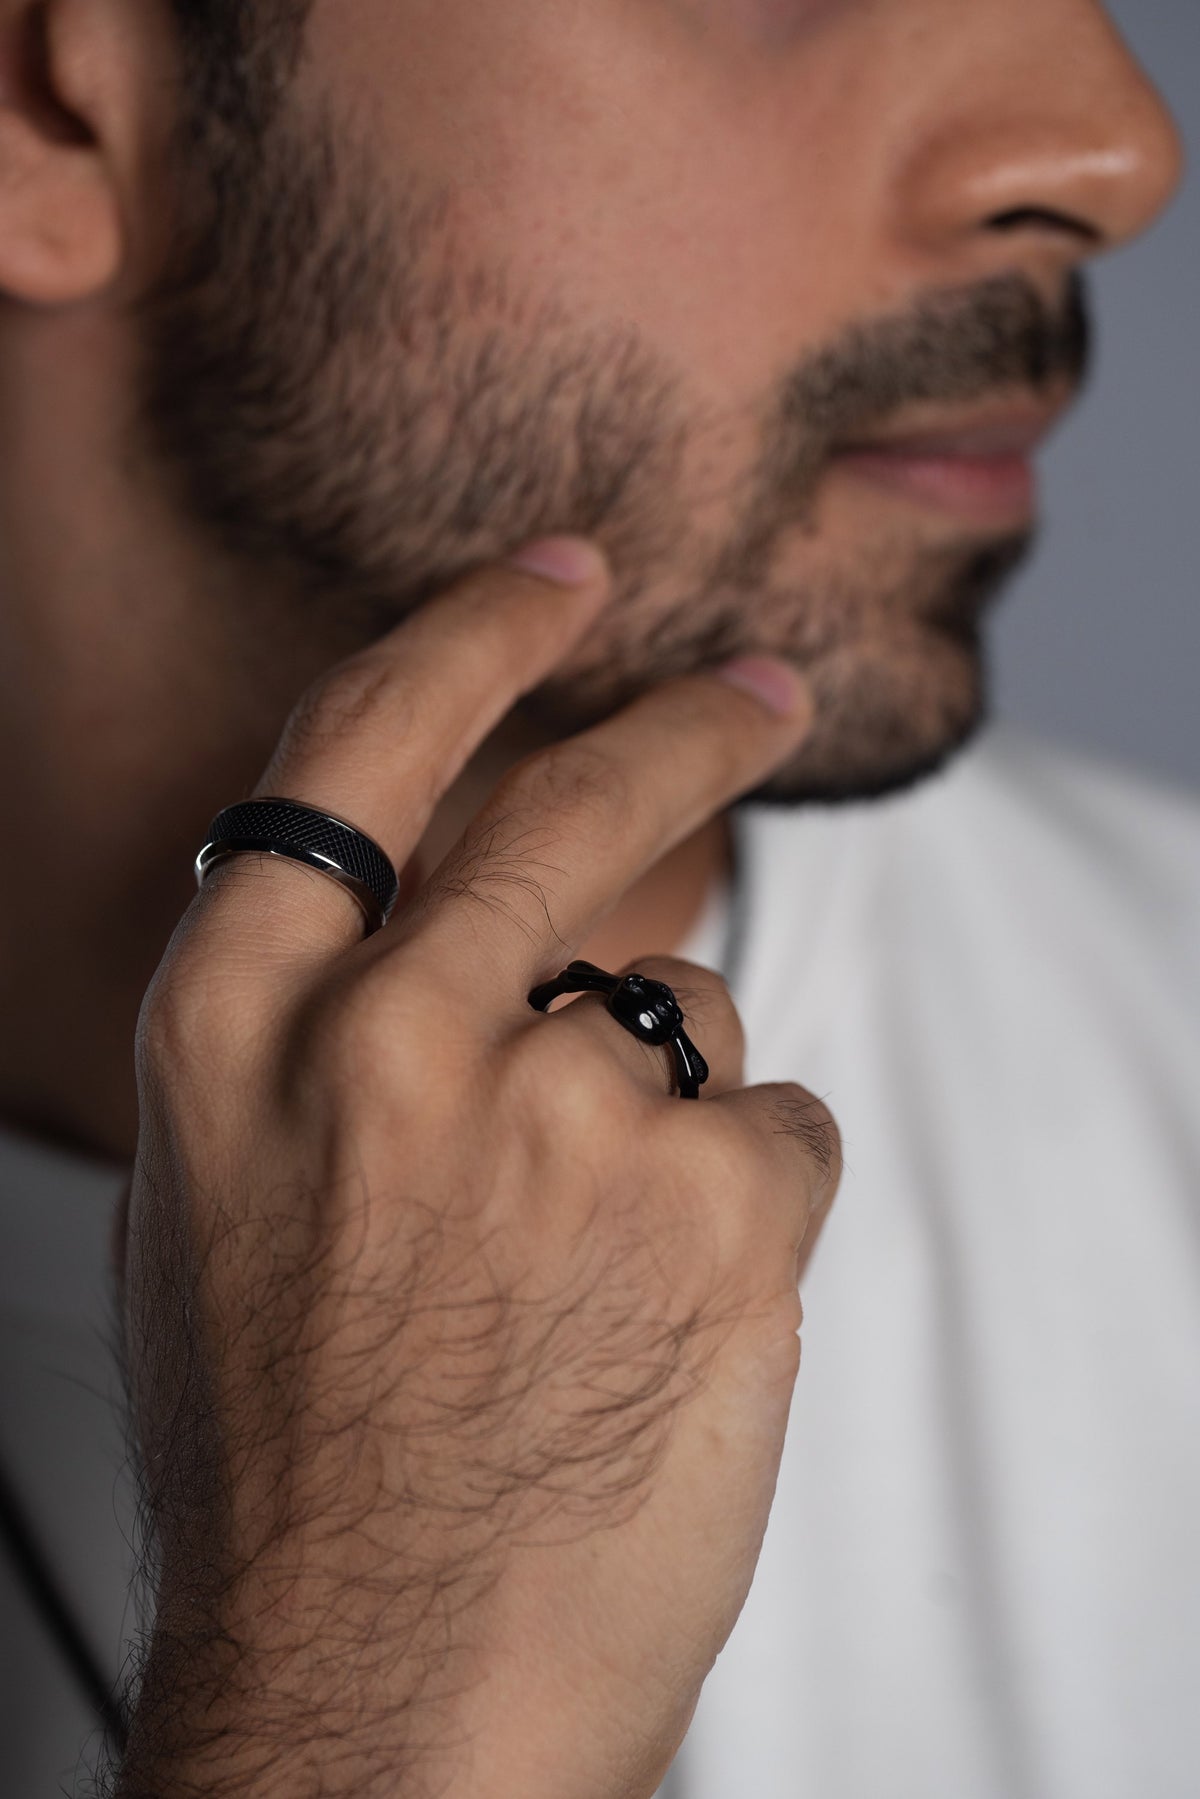 Black leather ring